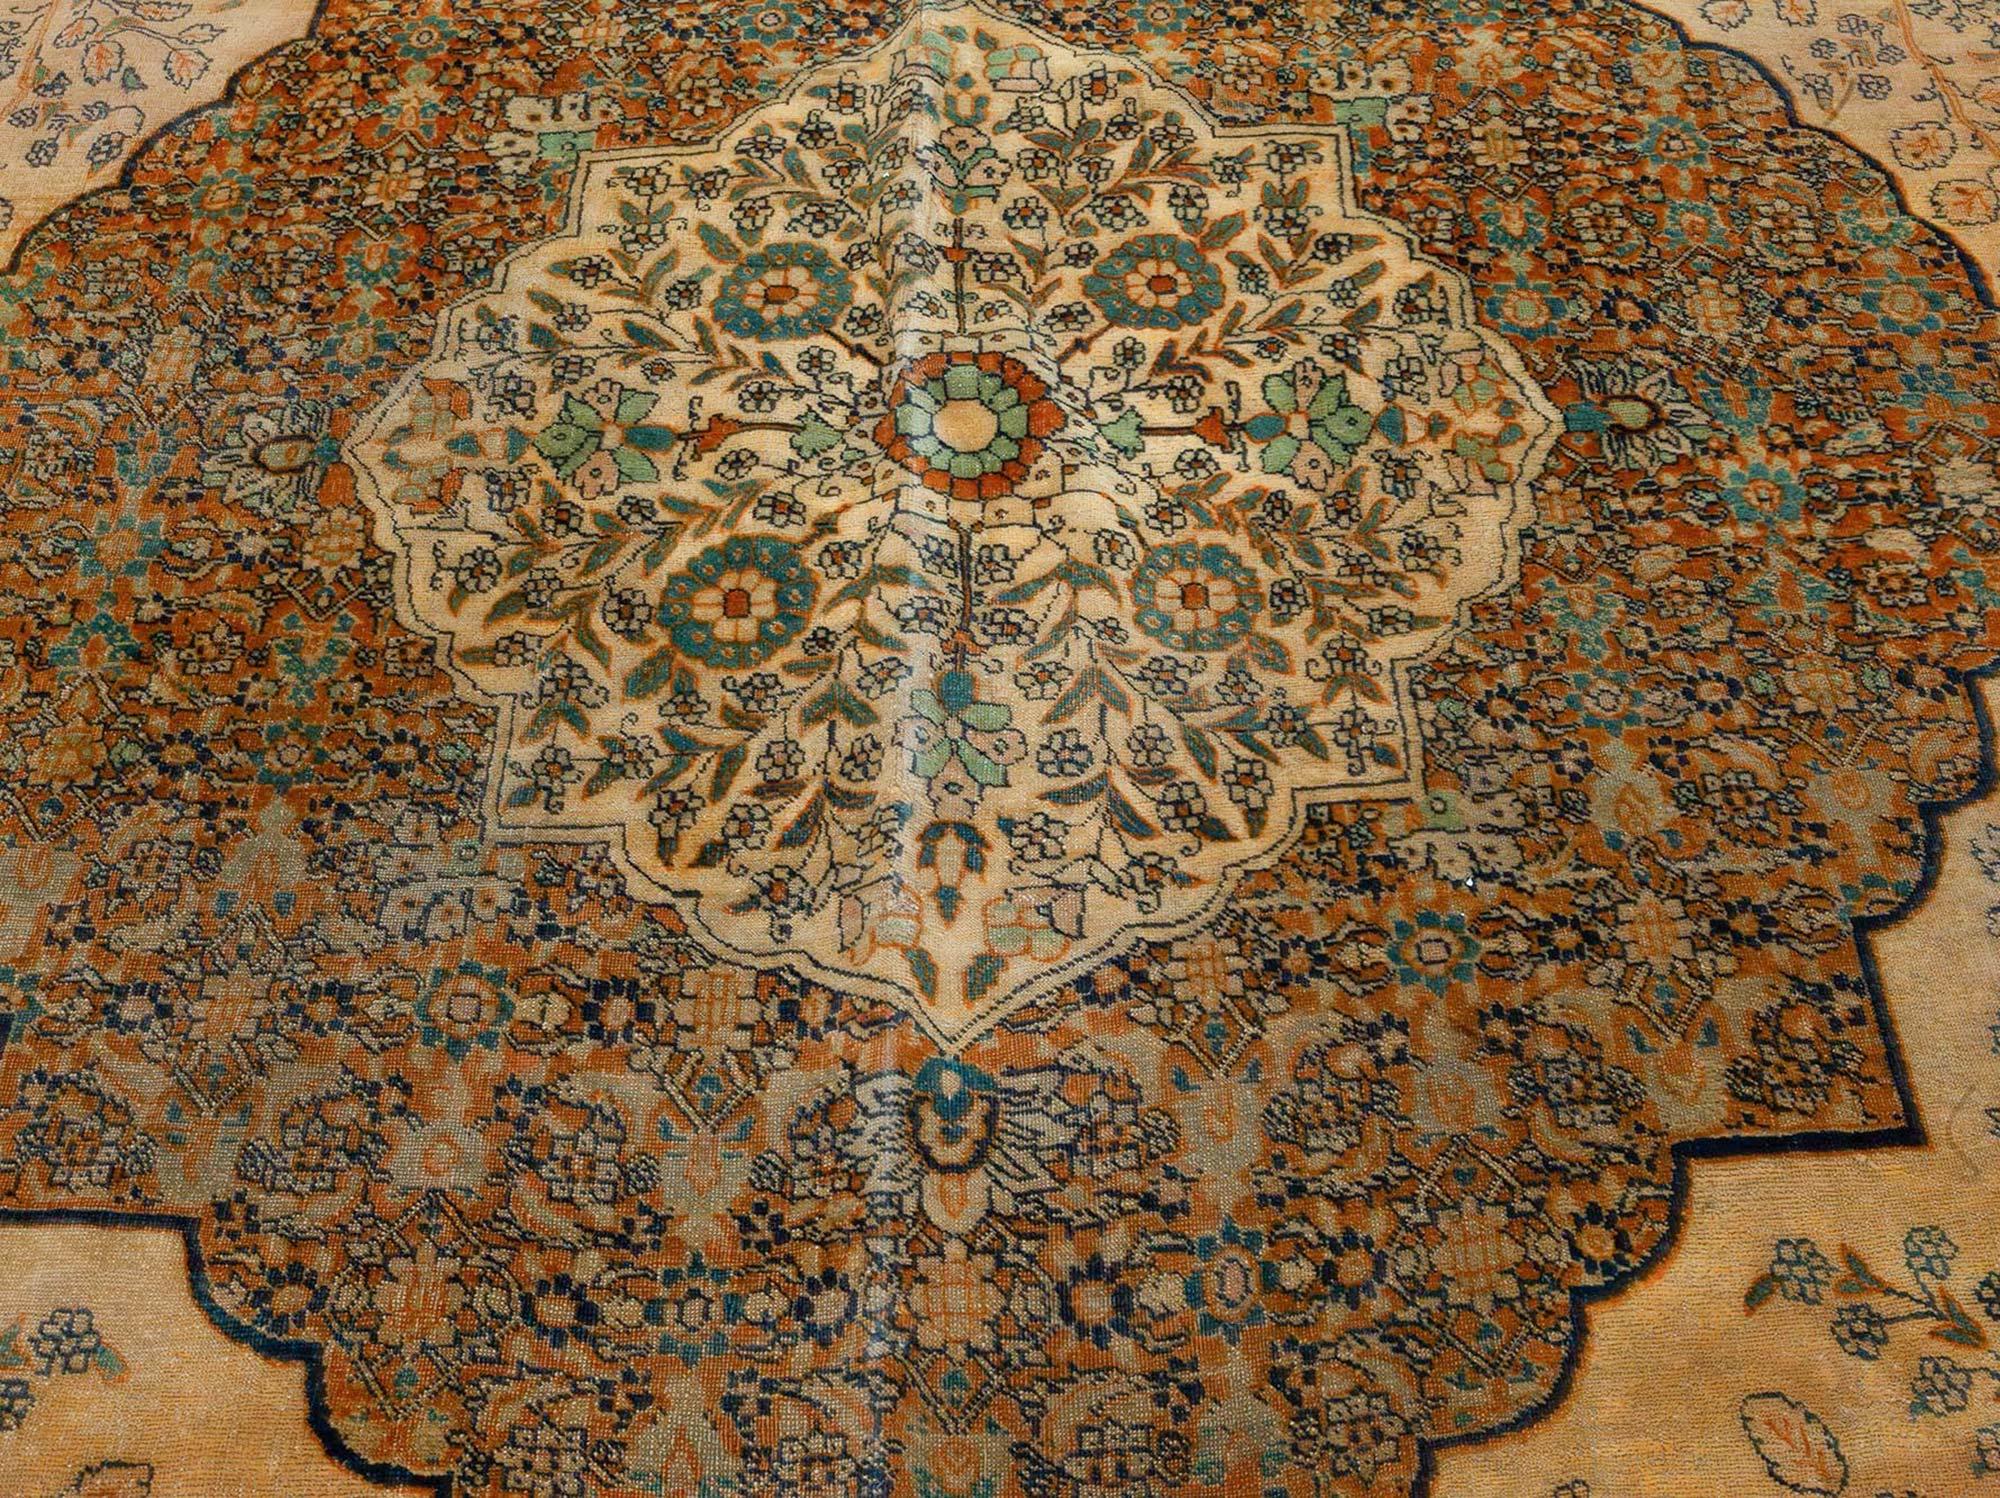 19th century Persian Tabriz green, beige and black hand knotted wool rug
Size: 7'1